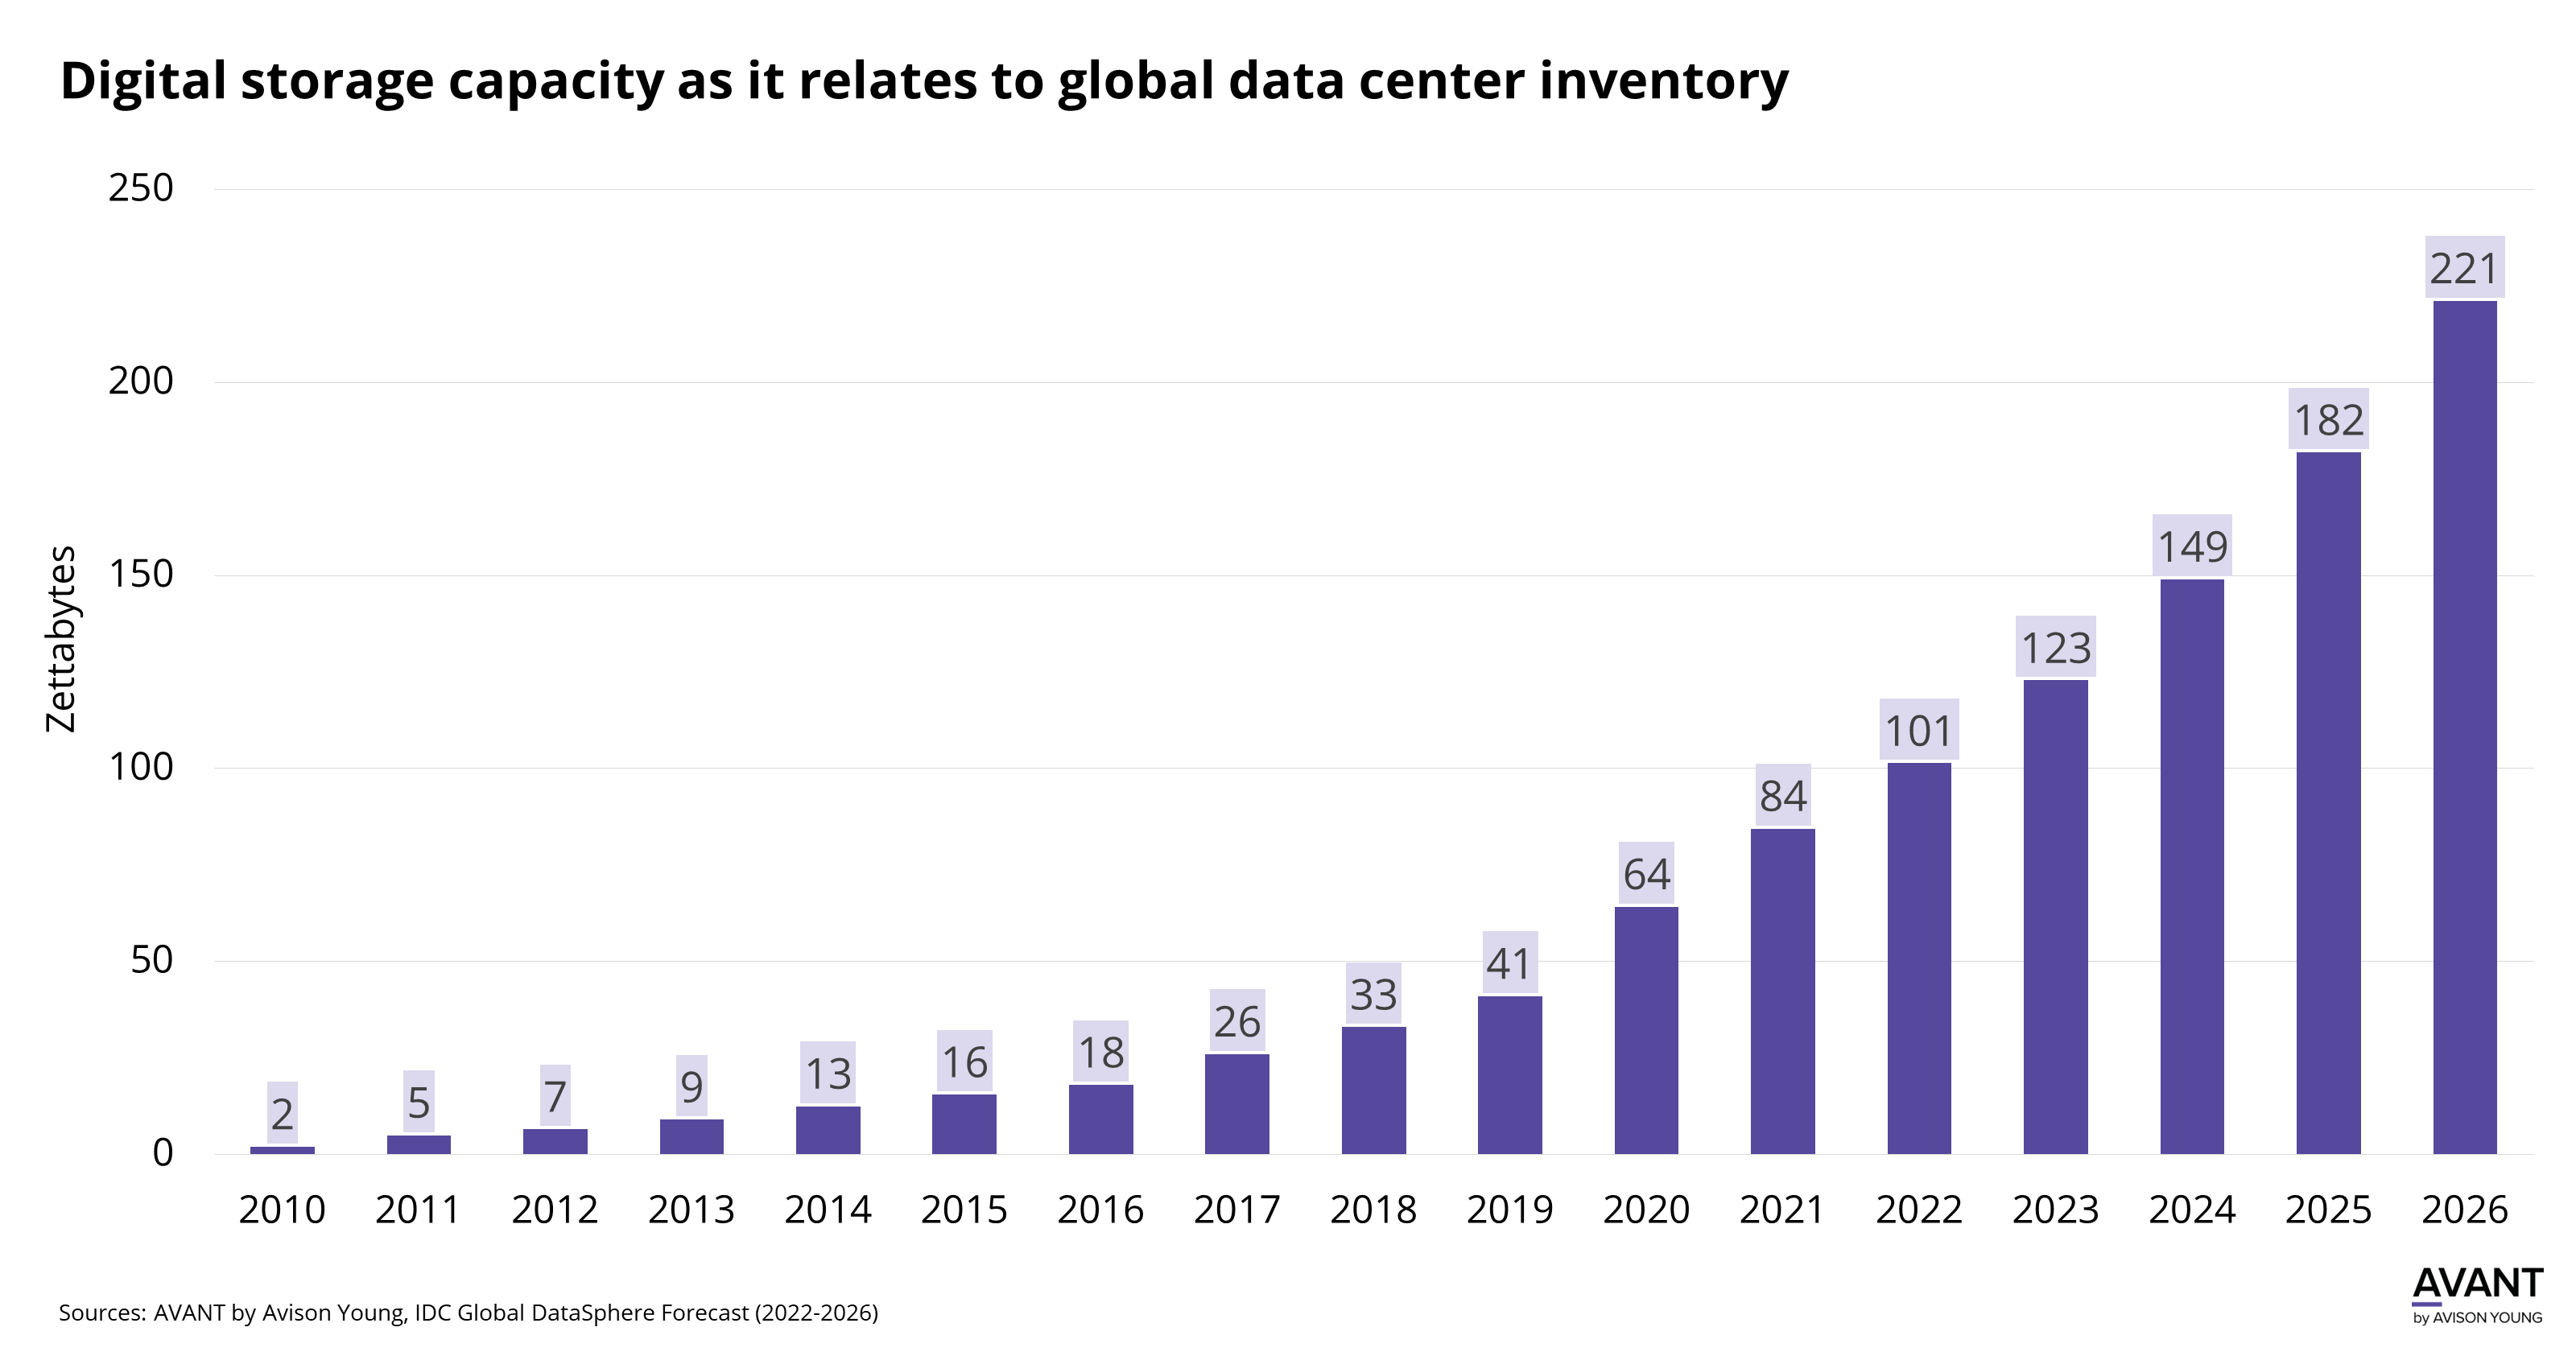 graph of digital storage capacity as it relates to global data center inventory from 2010 to 2026